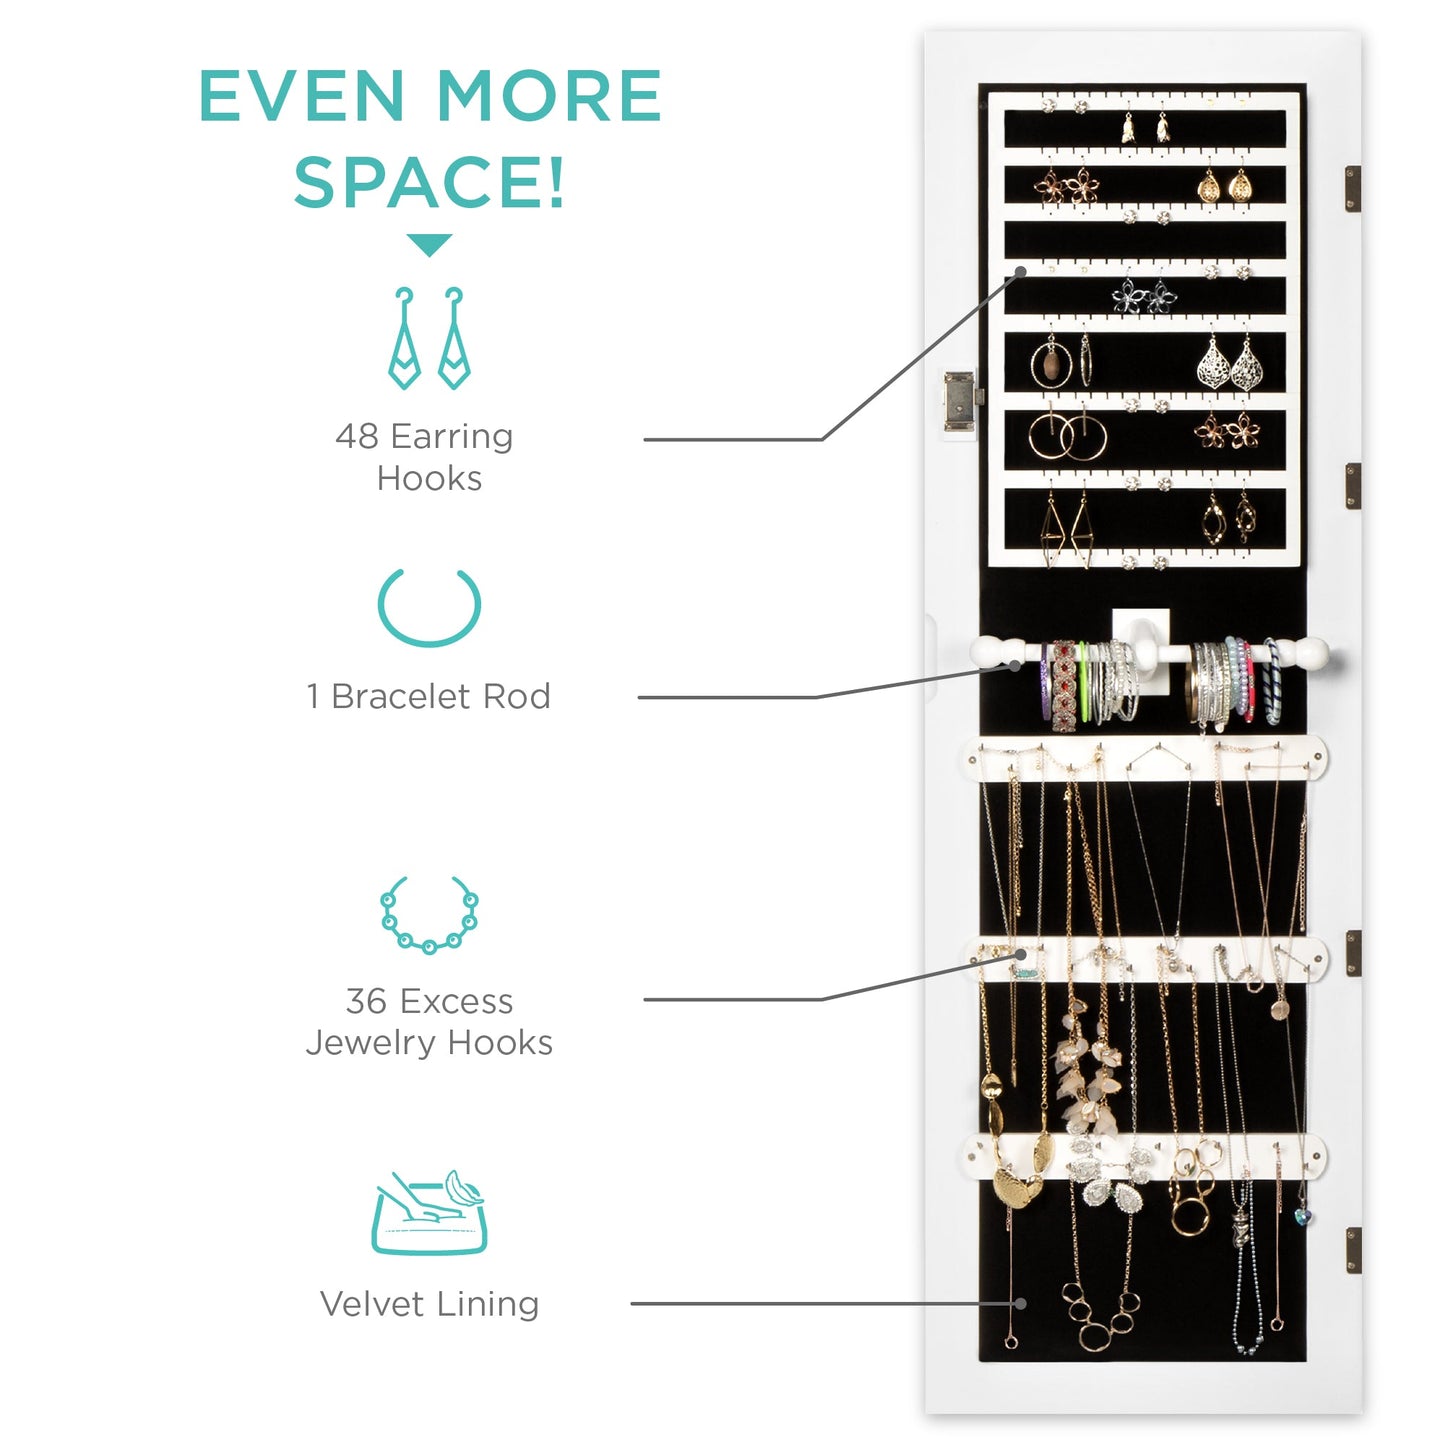 6-Tier Standing Jewelry Mirror Armoire w/ LED Lights